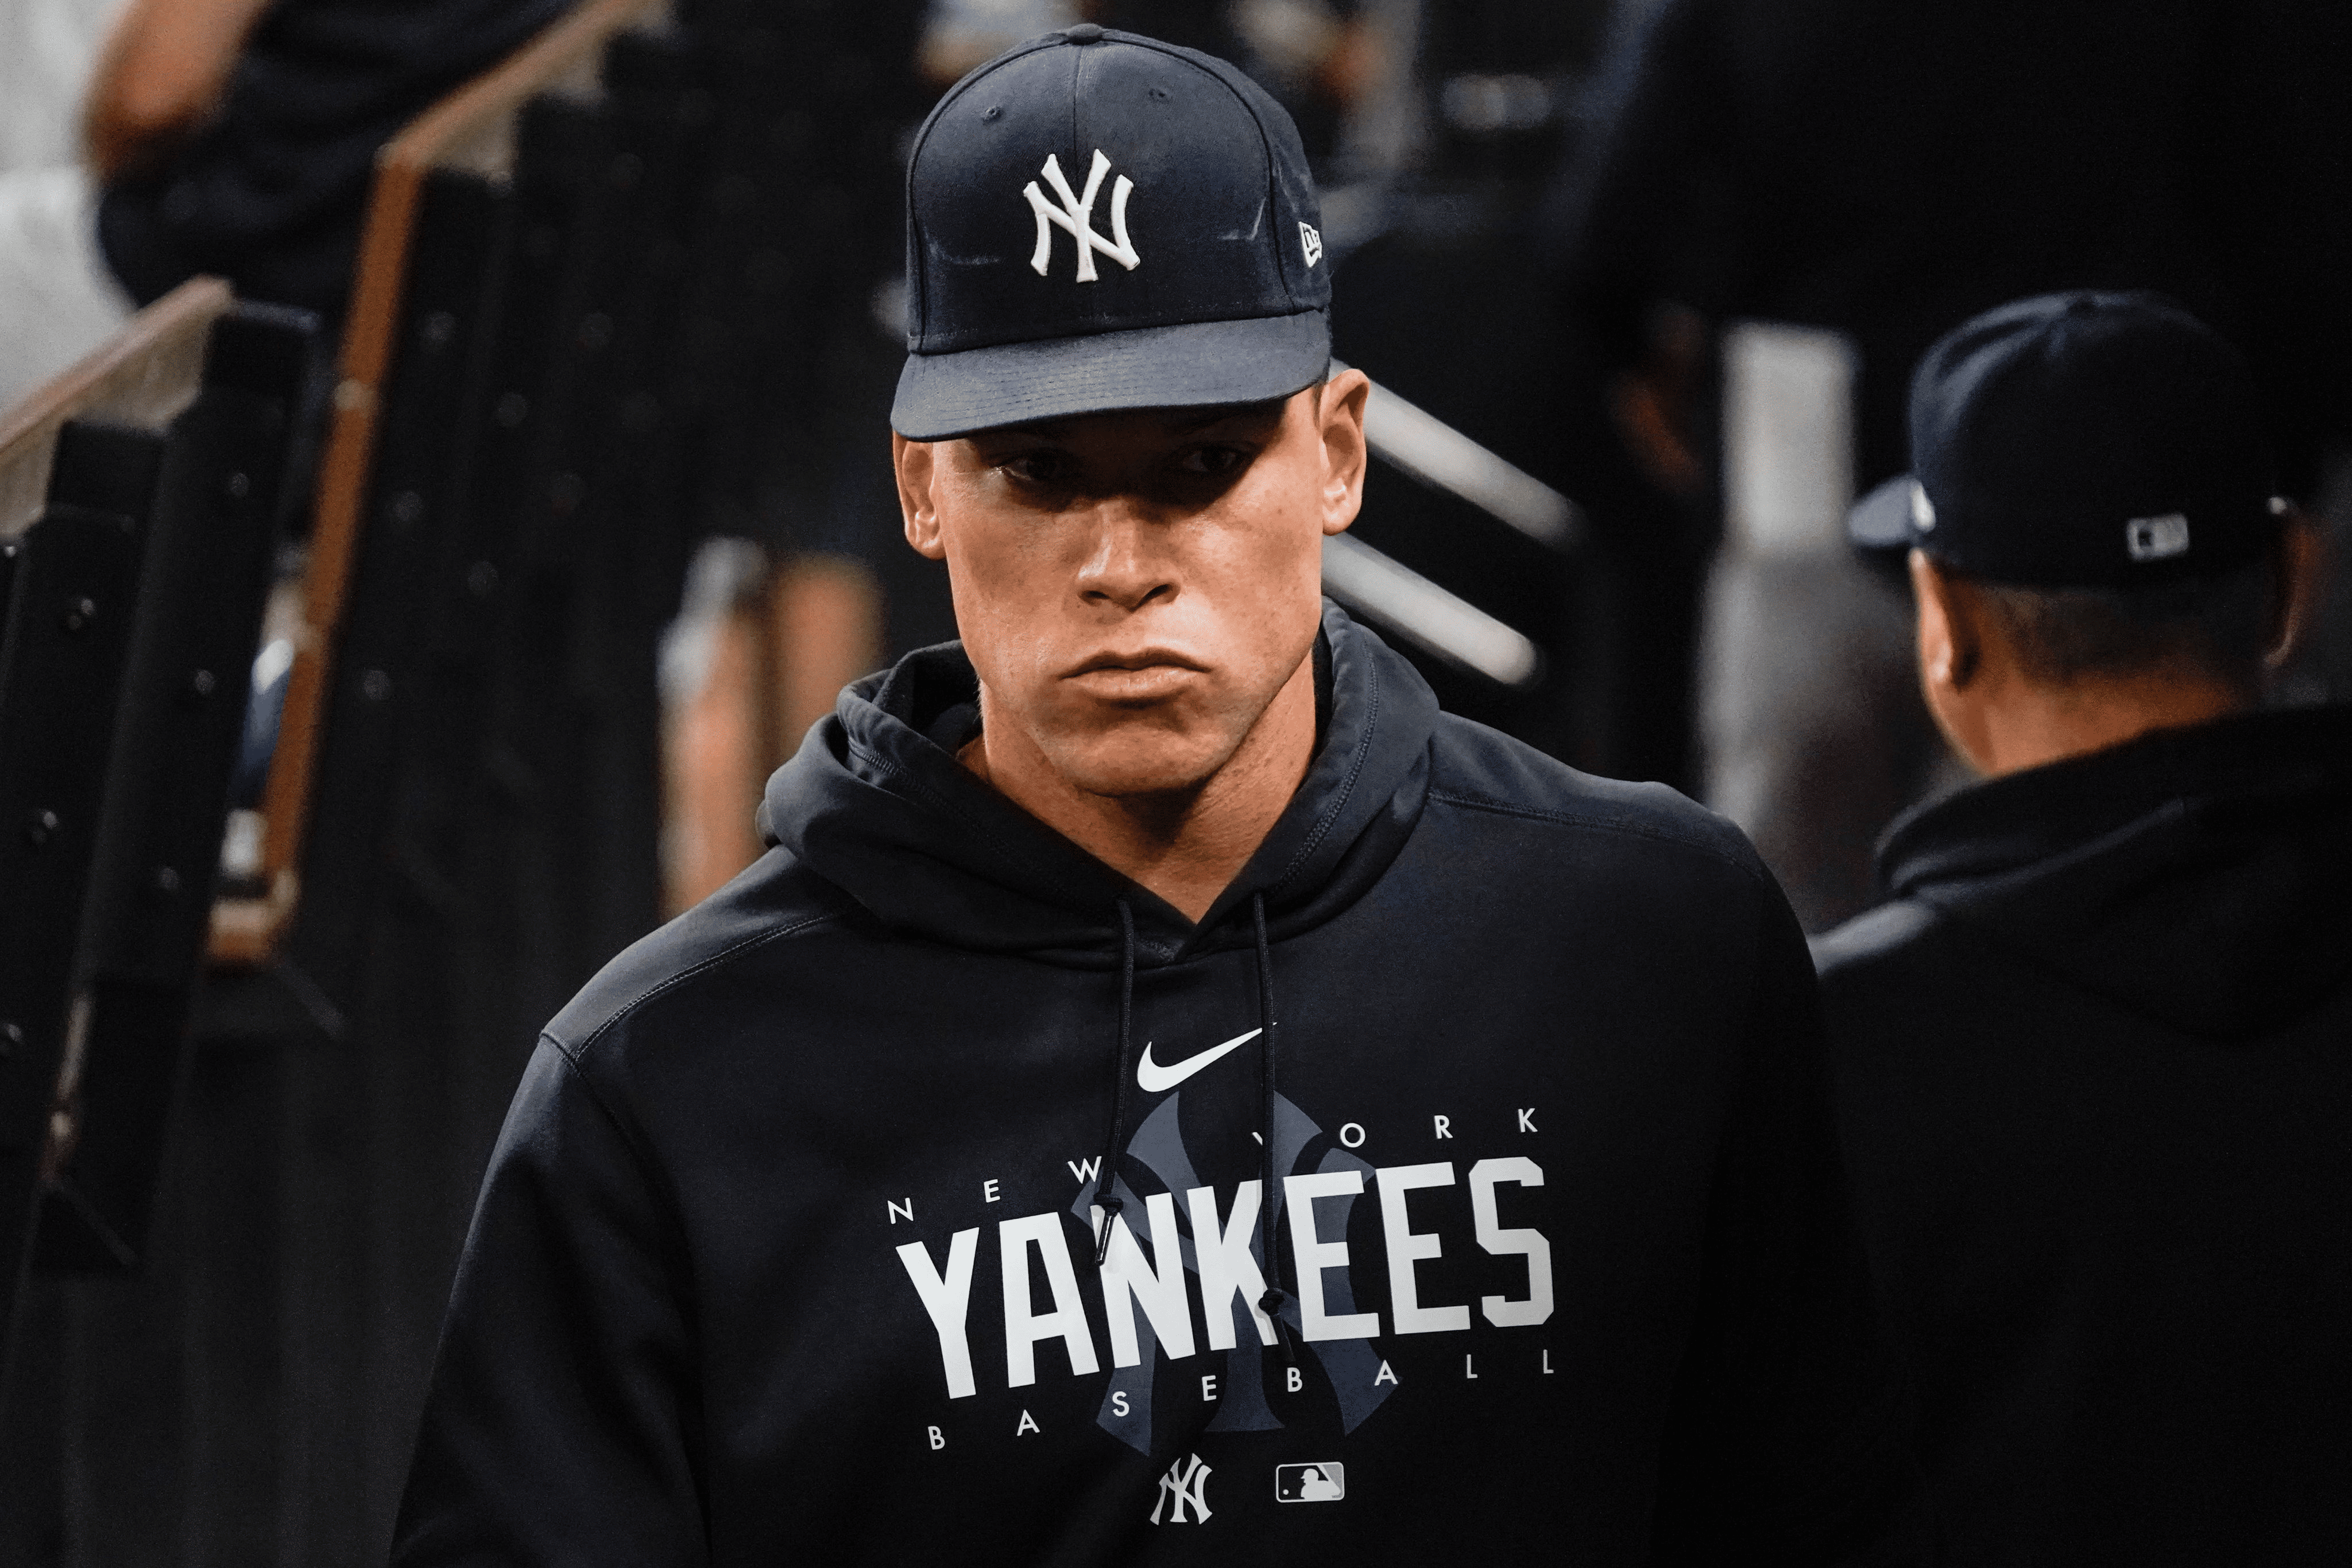 A Pair of Aarons, Judge and Hicks, Homer to Propel the Yankees